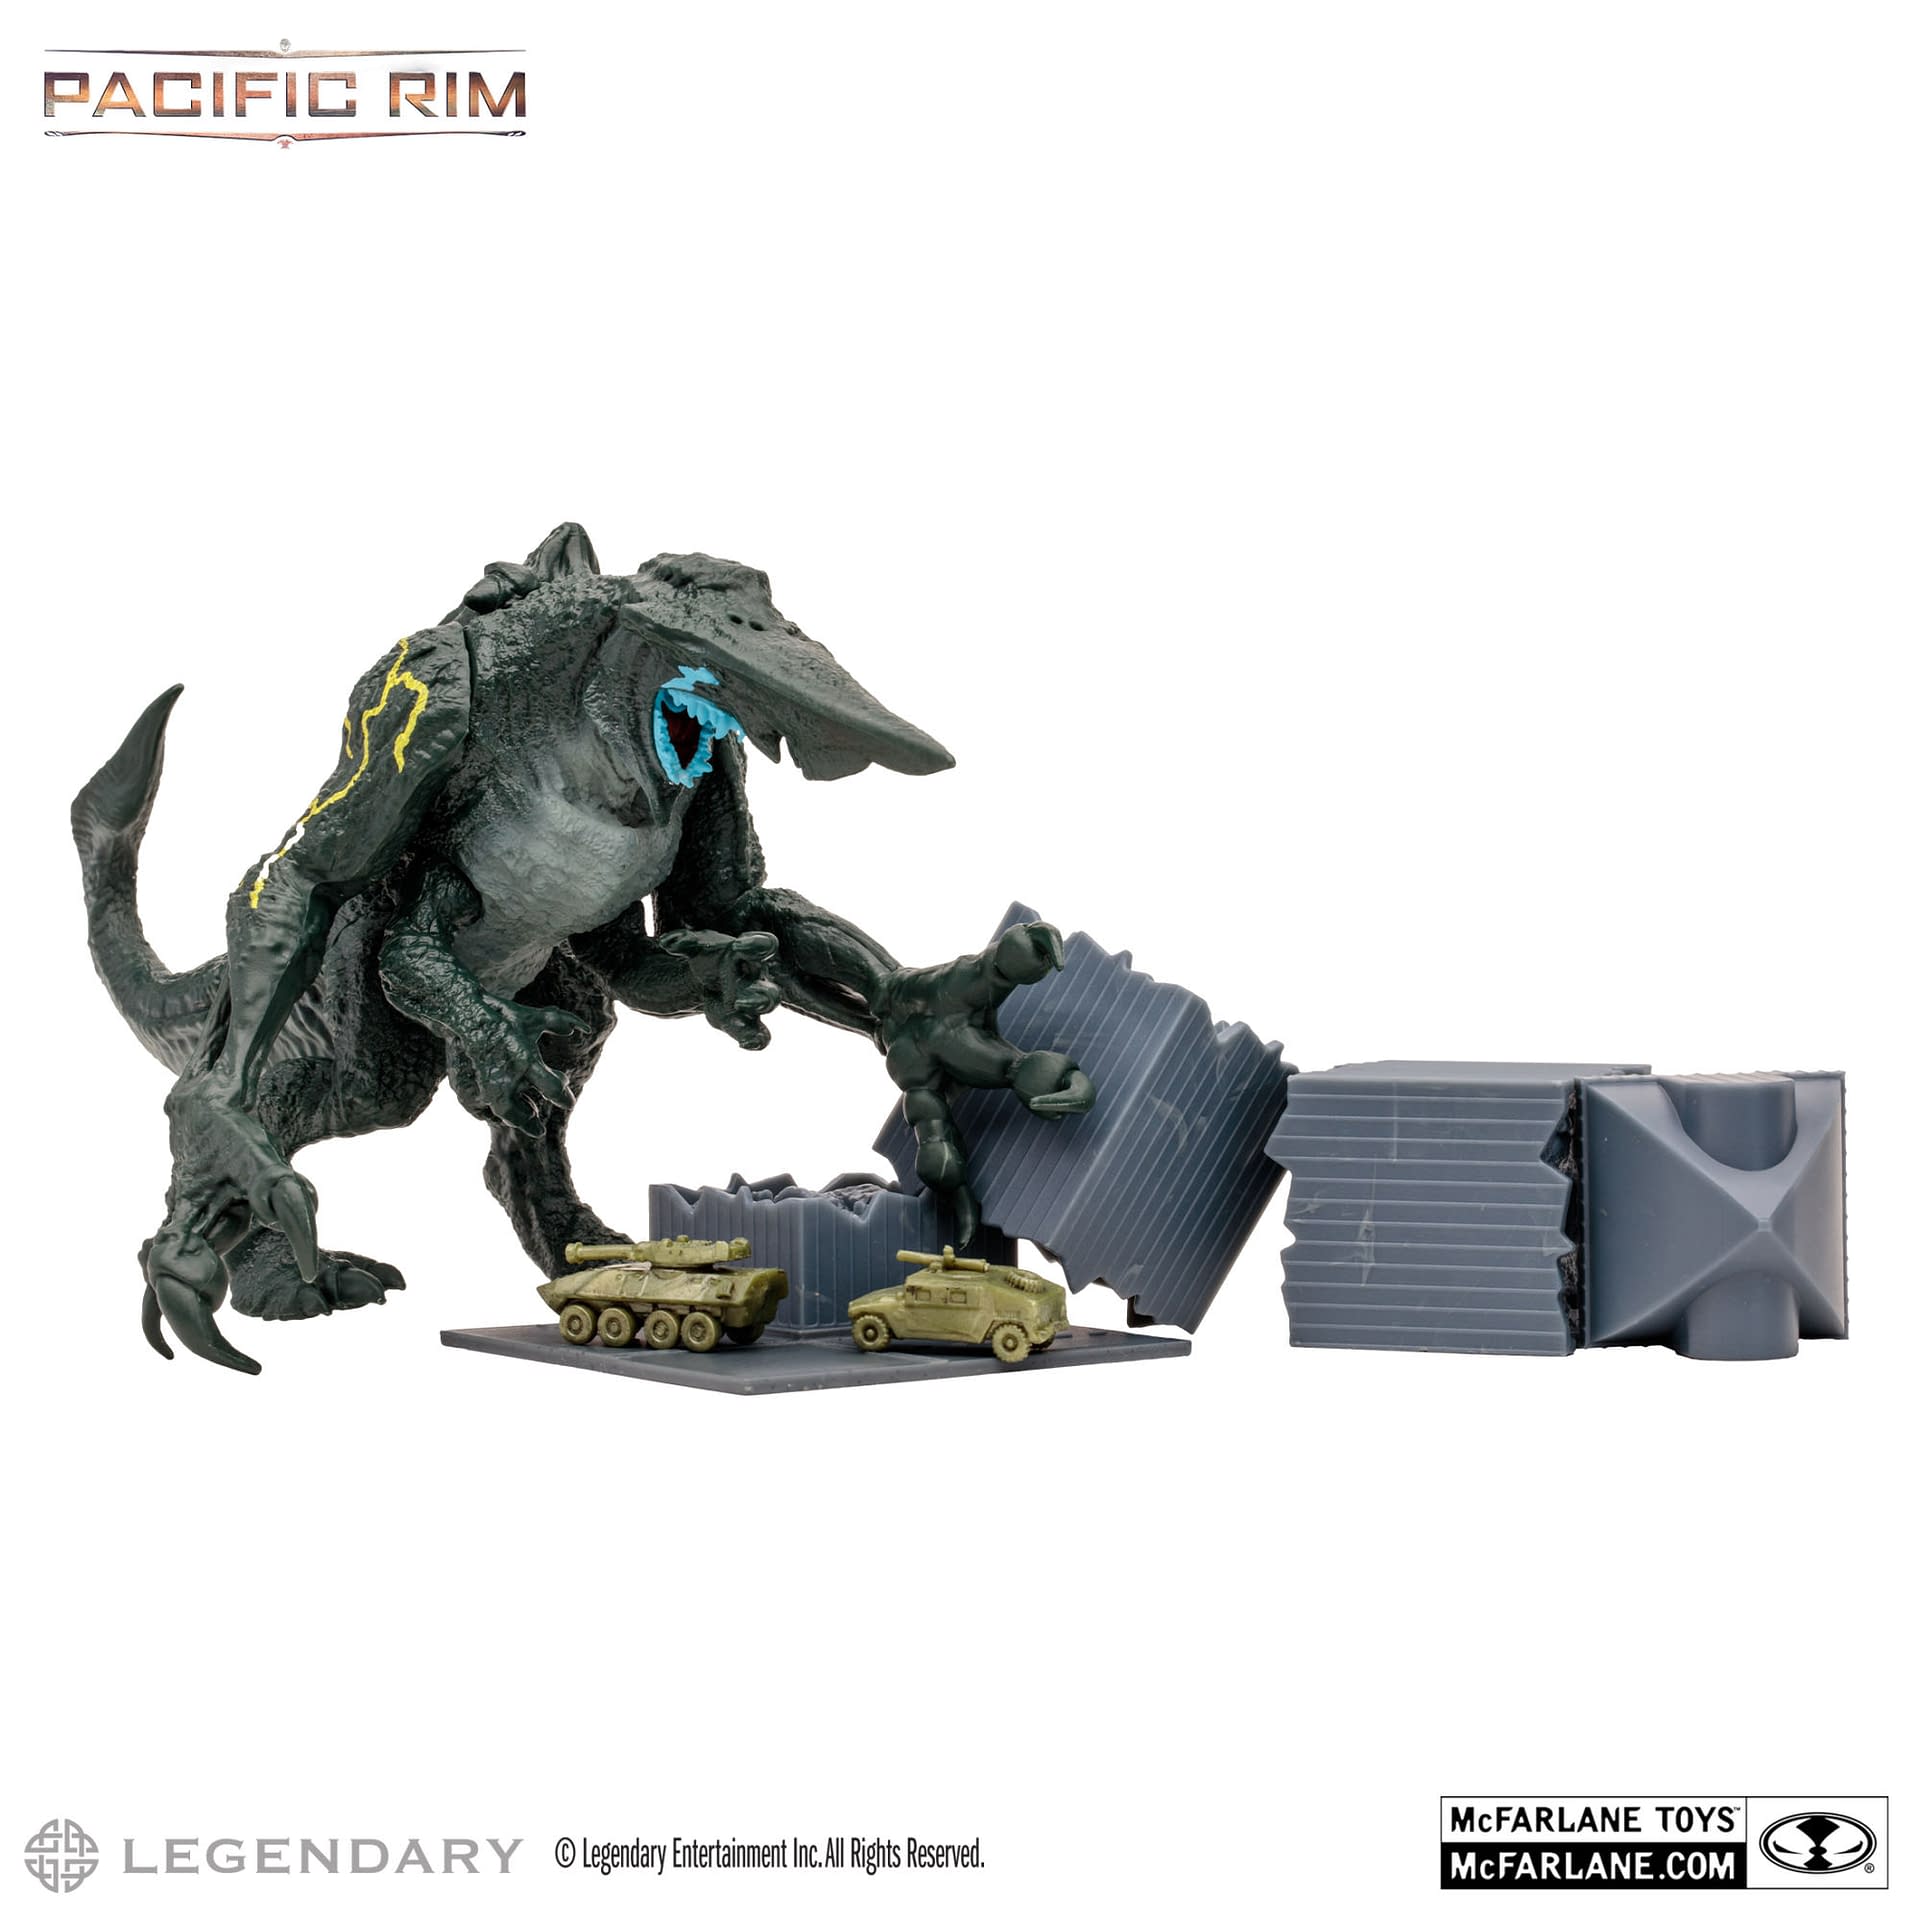 Kaiju's Rise with McFarlane Toys New Pacific Rim Page Punchers Line